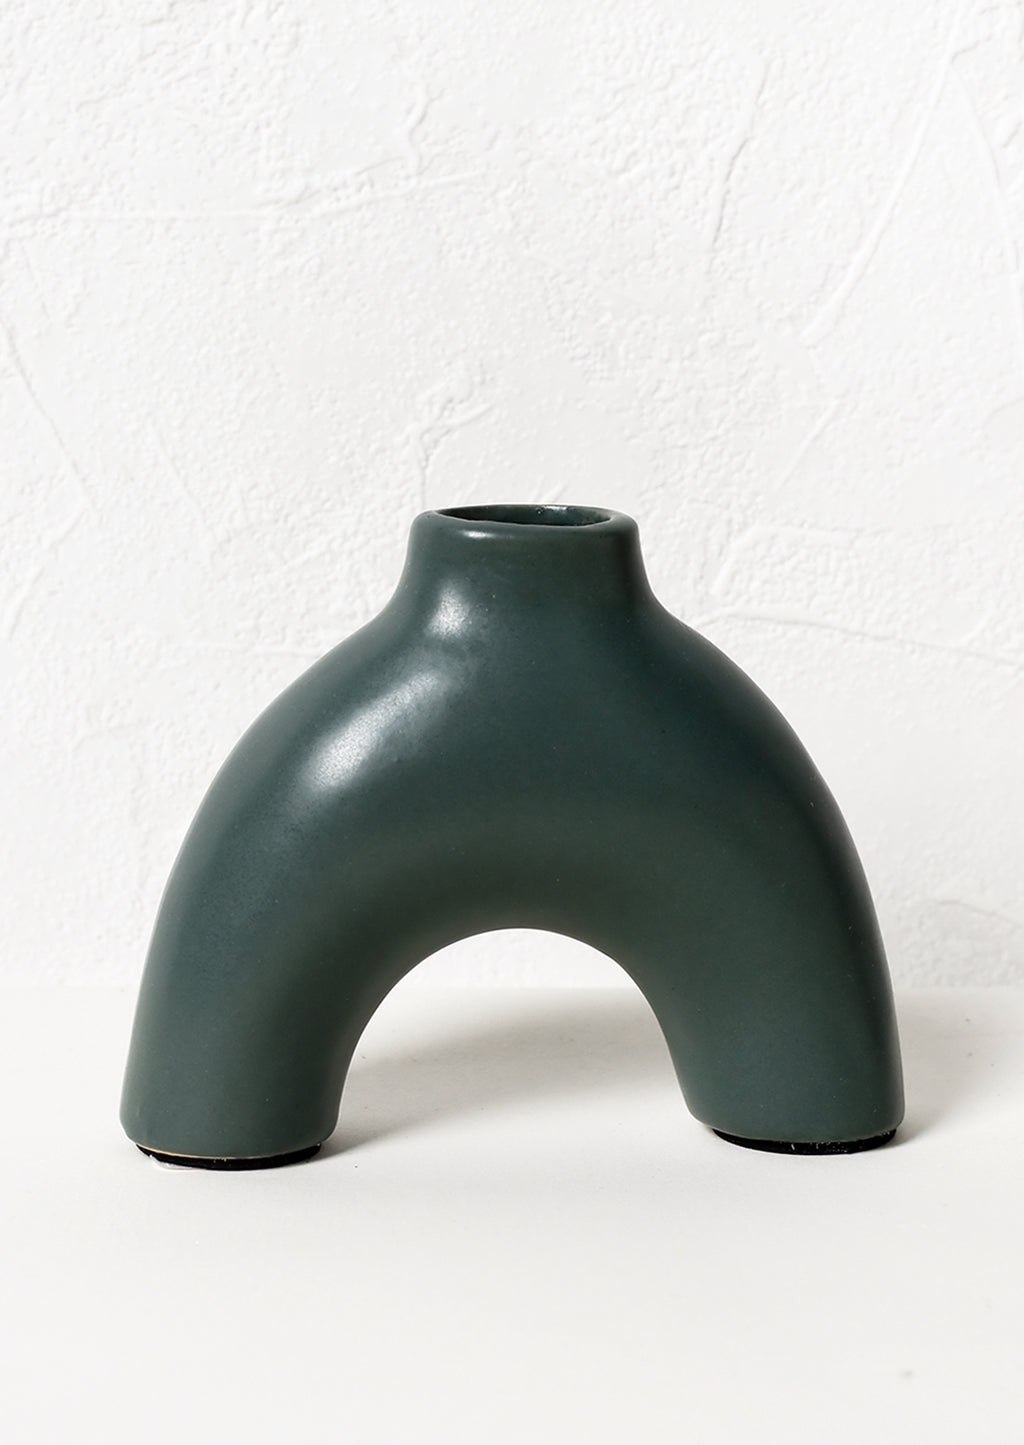 1: An arch shaped ceramic vase in teal color.